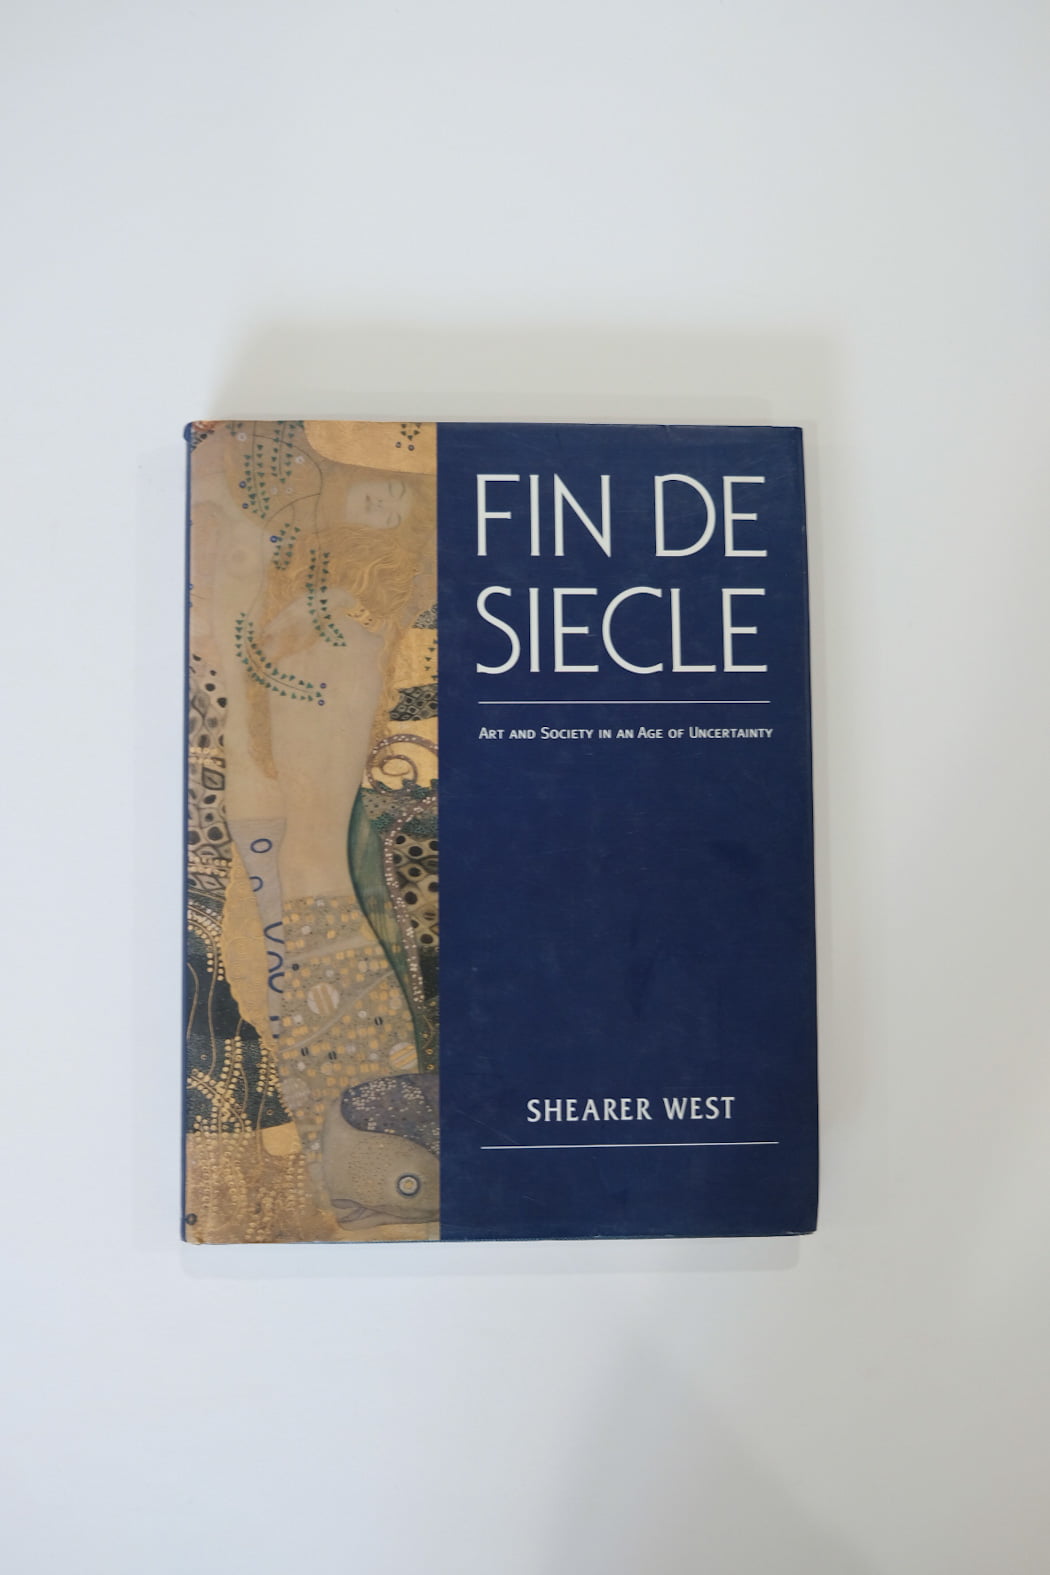 Fin De Siecle Art and Society in an Age of Uncertainty by West Shearer